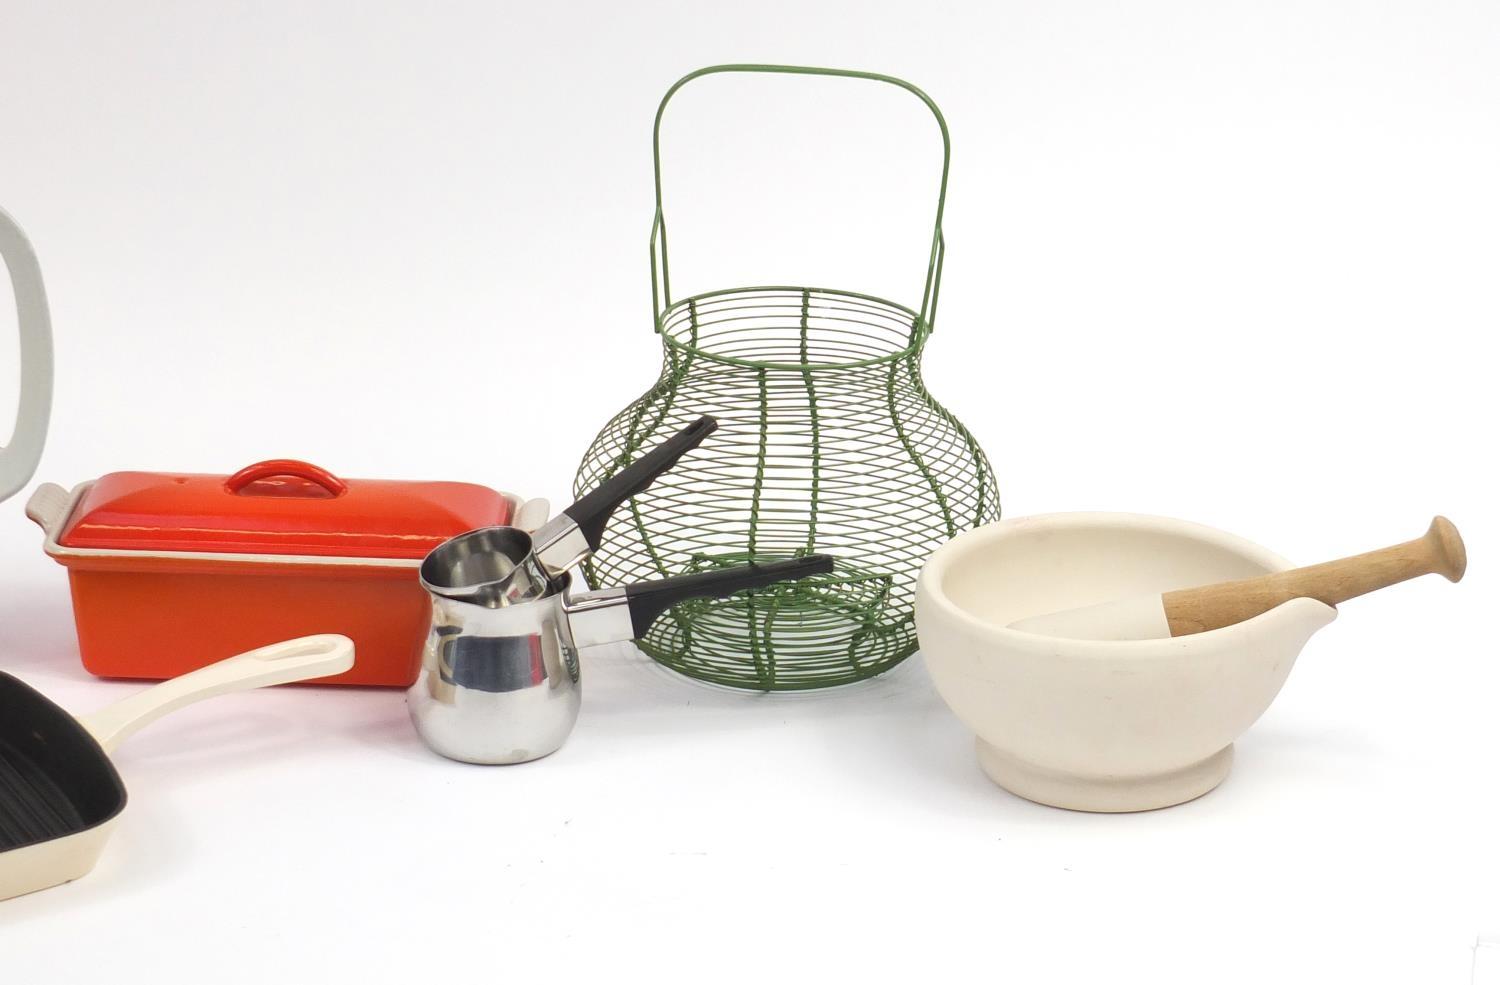 Kitchenalia comprising a parian pestle and mortar, Le Creuset paella dish, baking dish and griddle - Image 4 of 9